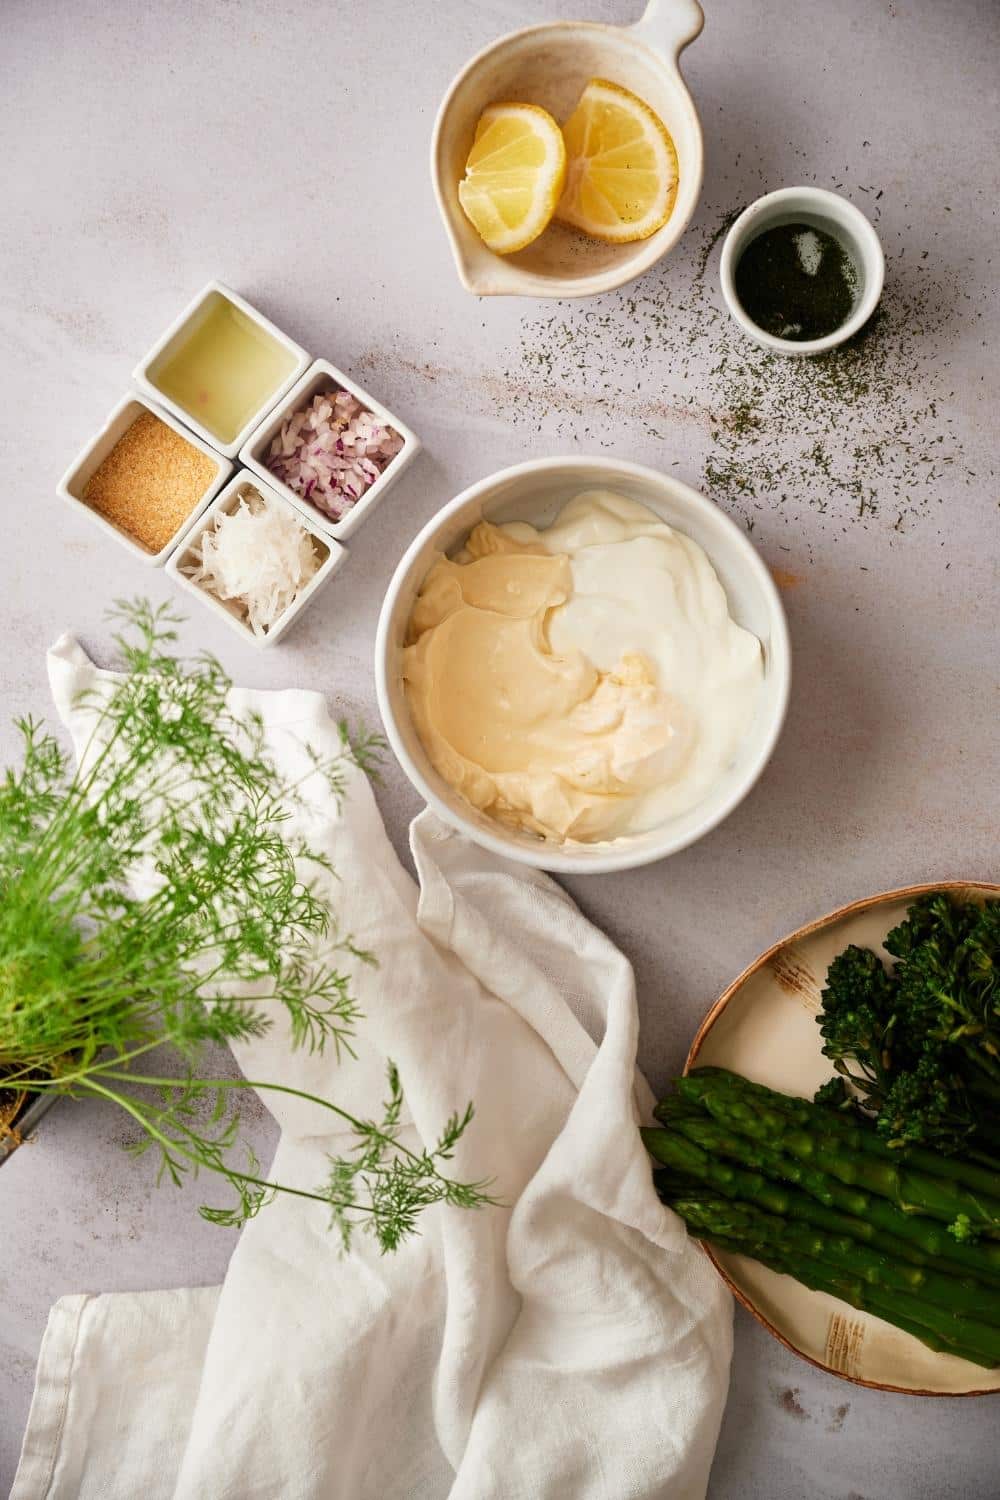 A medium sized bowl filled with yogurt and mayonnaise. The bowl is surrounded by prepared dill sauce ingredients and part of a plate of broccolini and asparagus can be seen on the side.